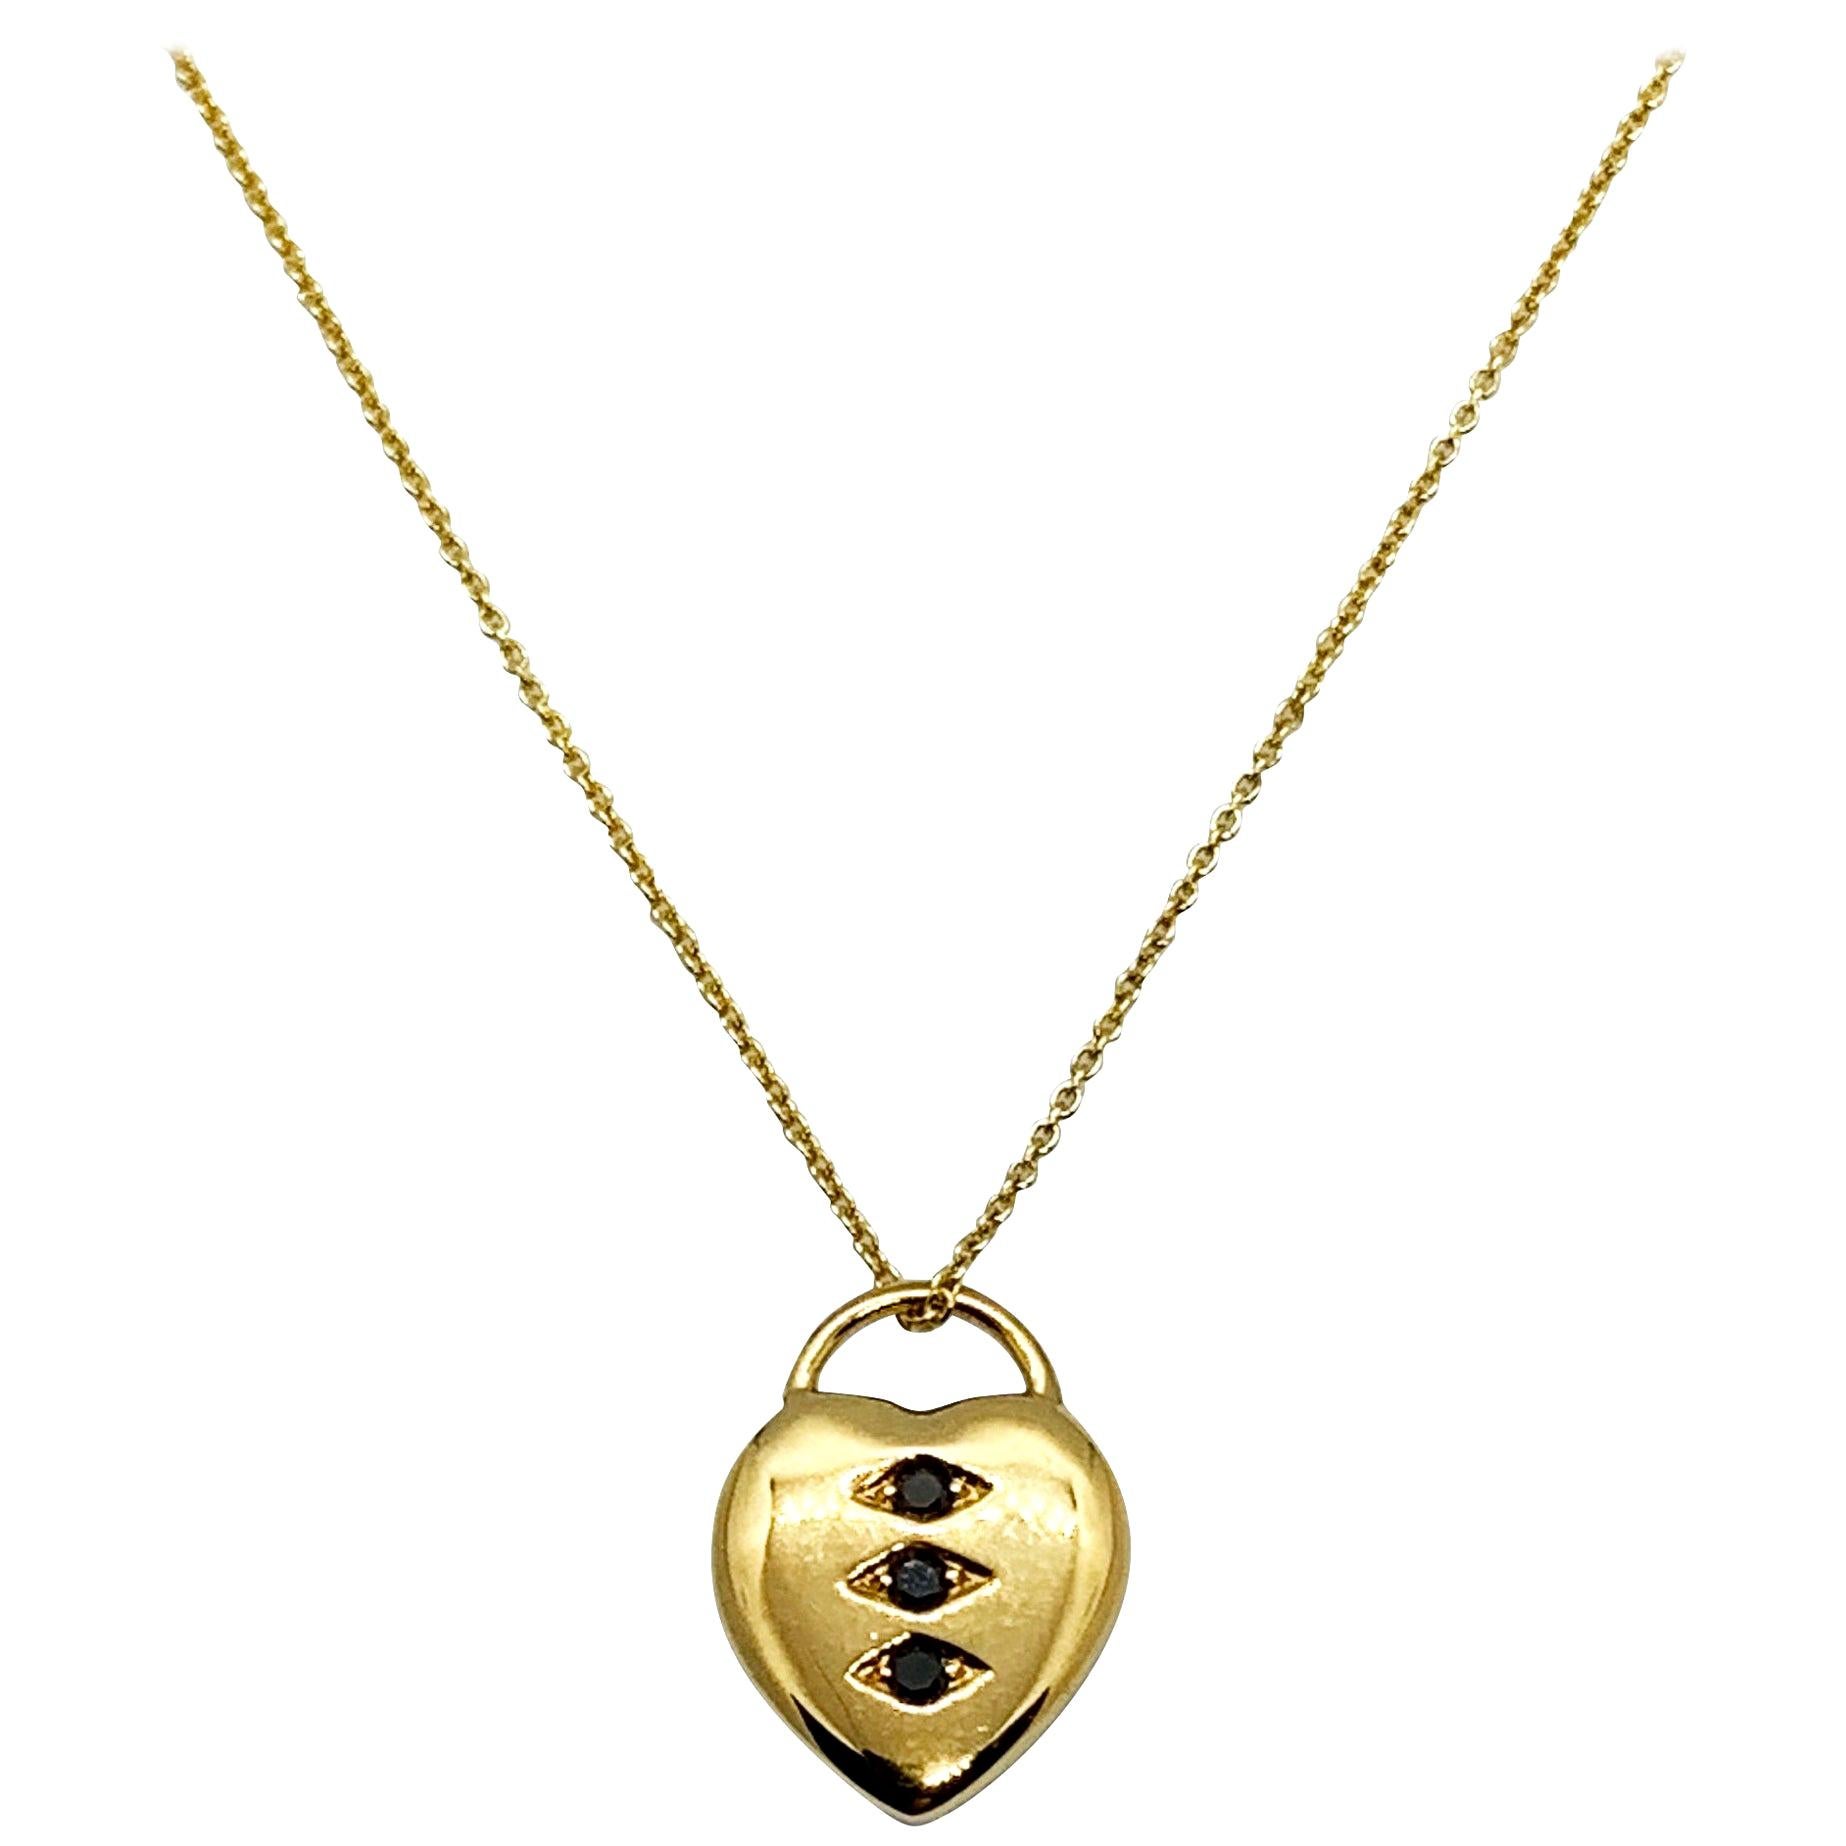 Luca Jouel Petite Black Diamond Heart Necklace in Yellow Gold For Sale